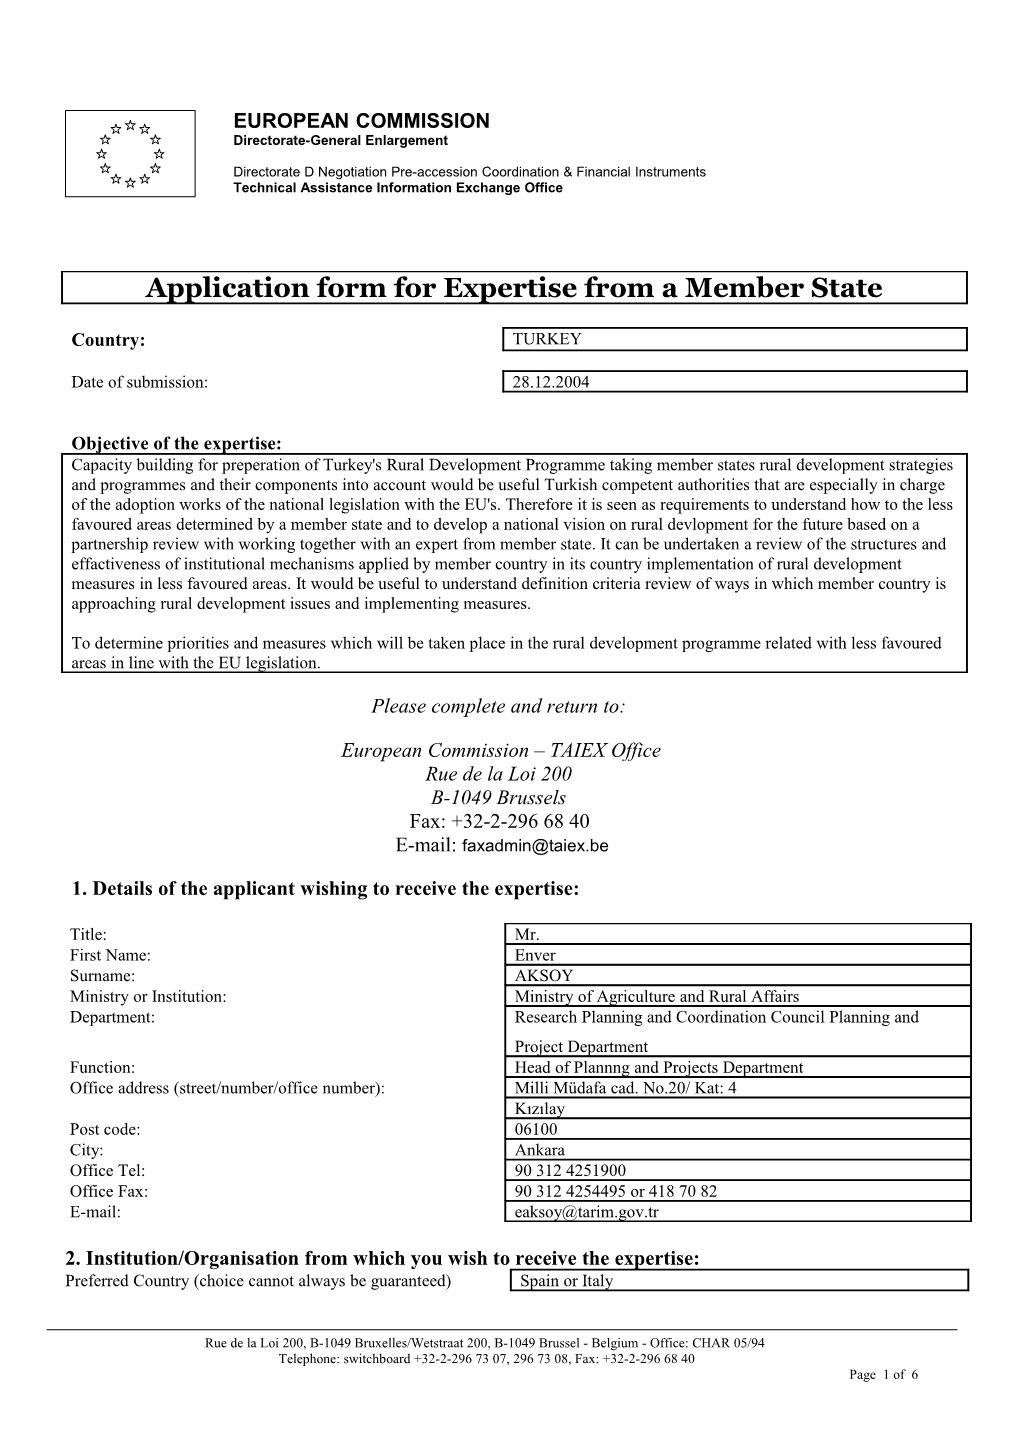 Application Form for Expertise from a Member State